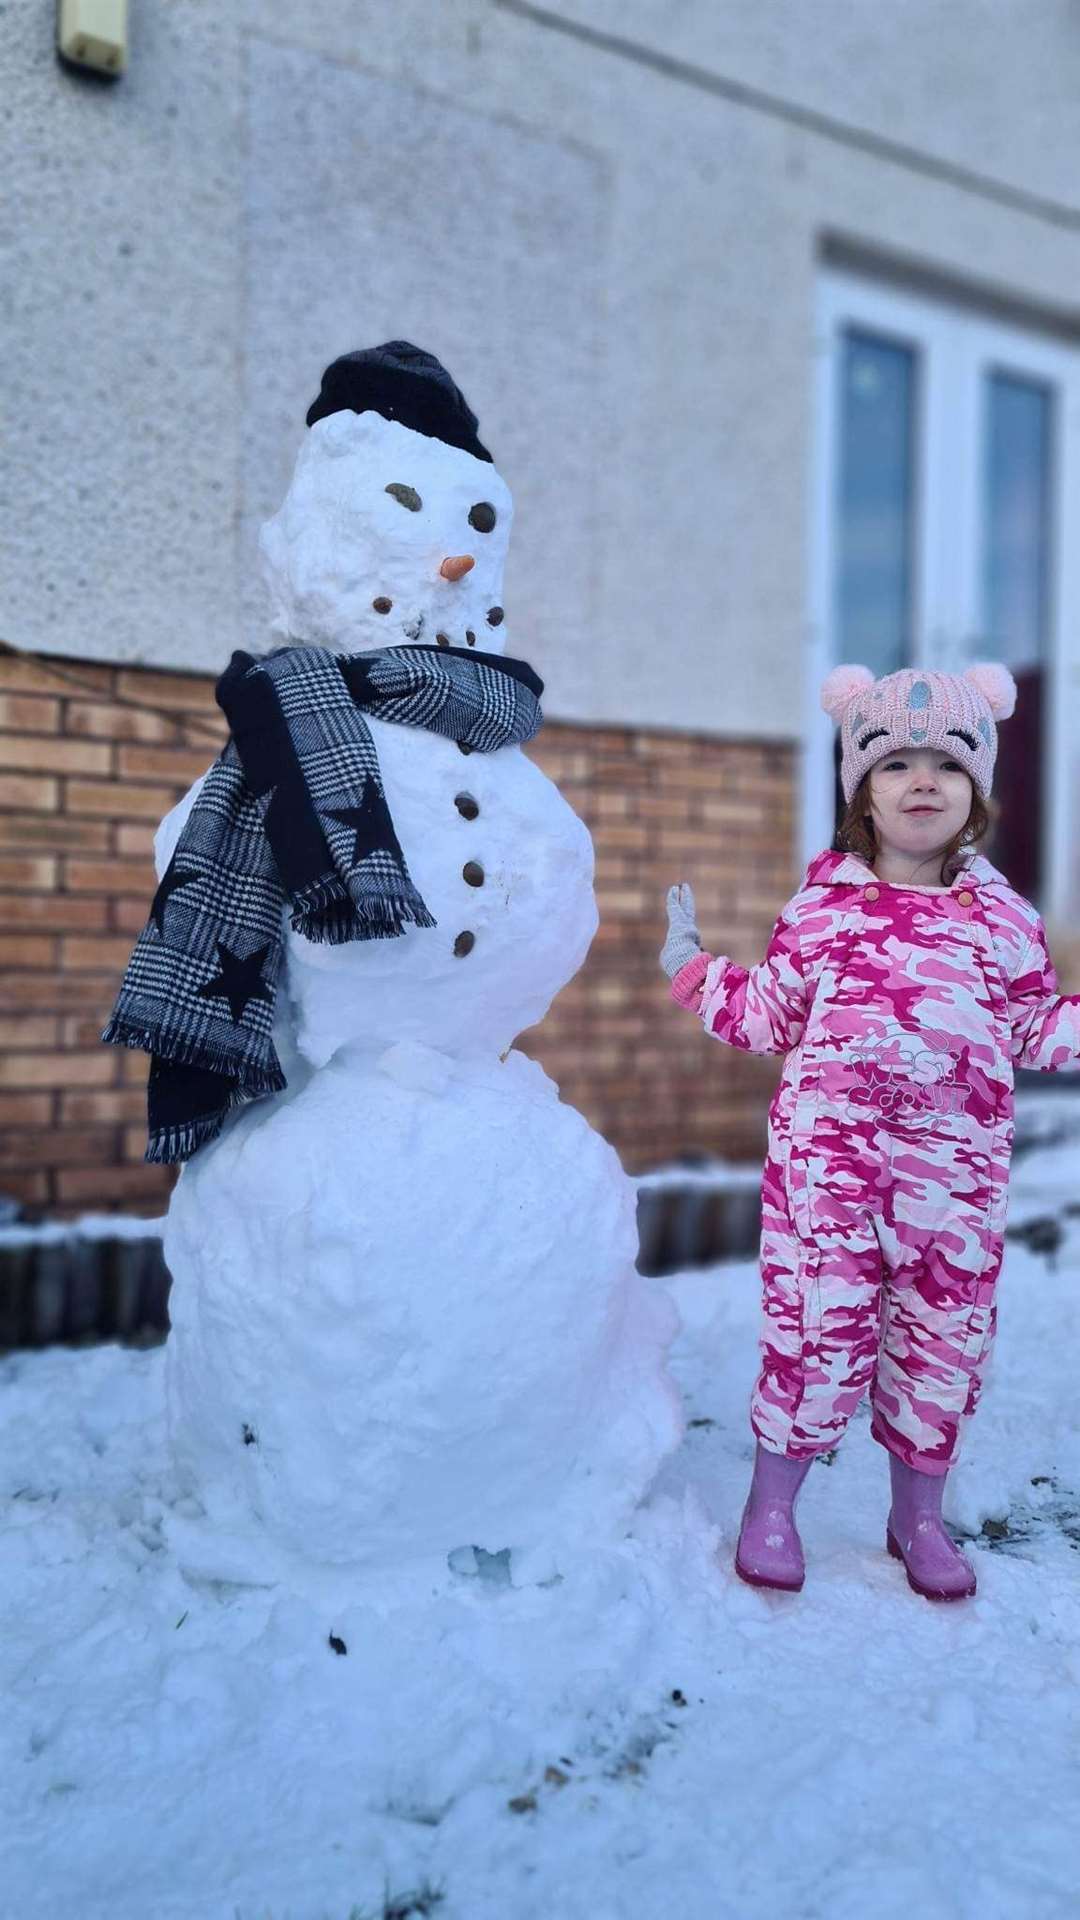 Billy Corbett took this shot of his two-year-old granddaughter, Caelin Corbett, from Evanton alongside her first ever snowman.